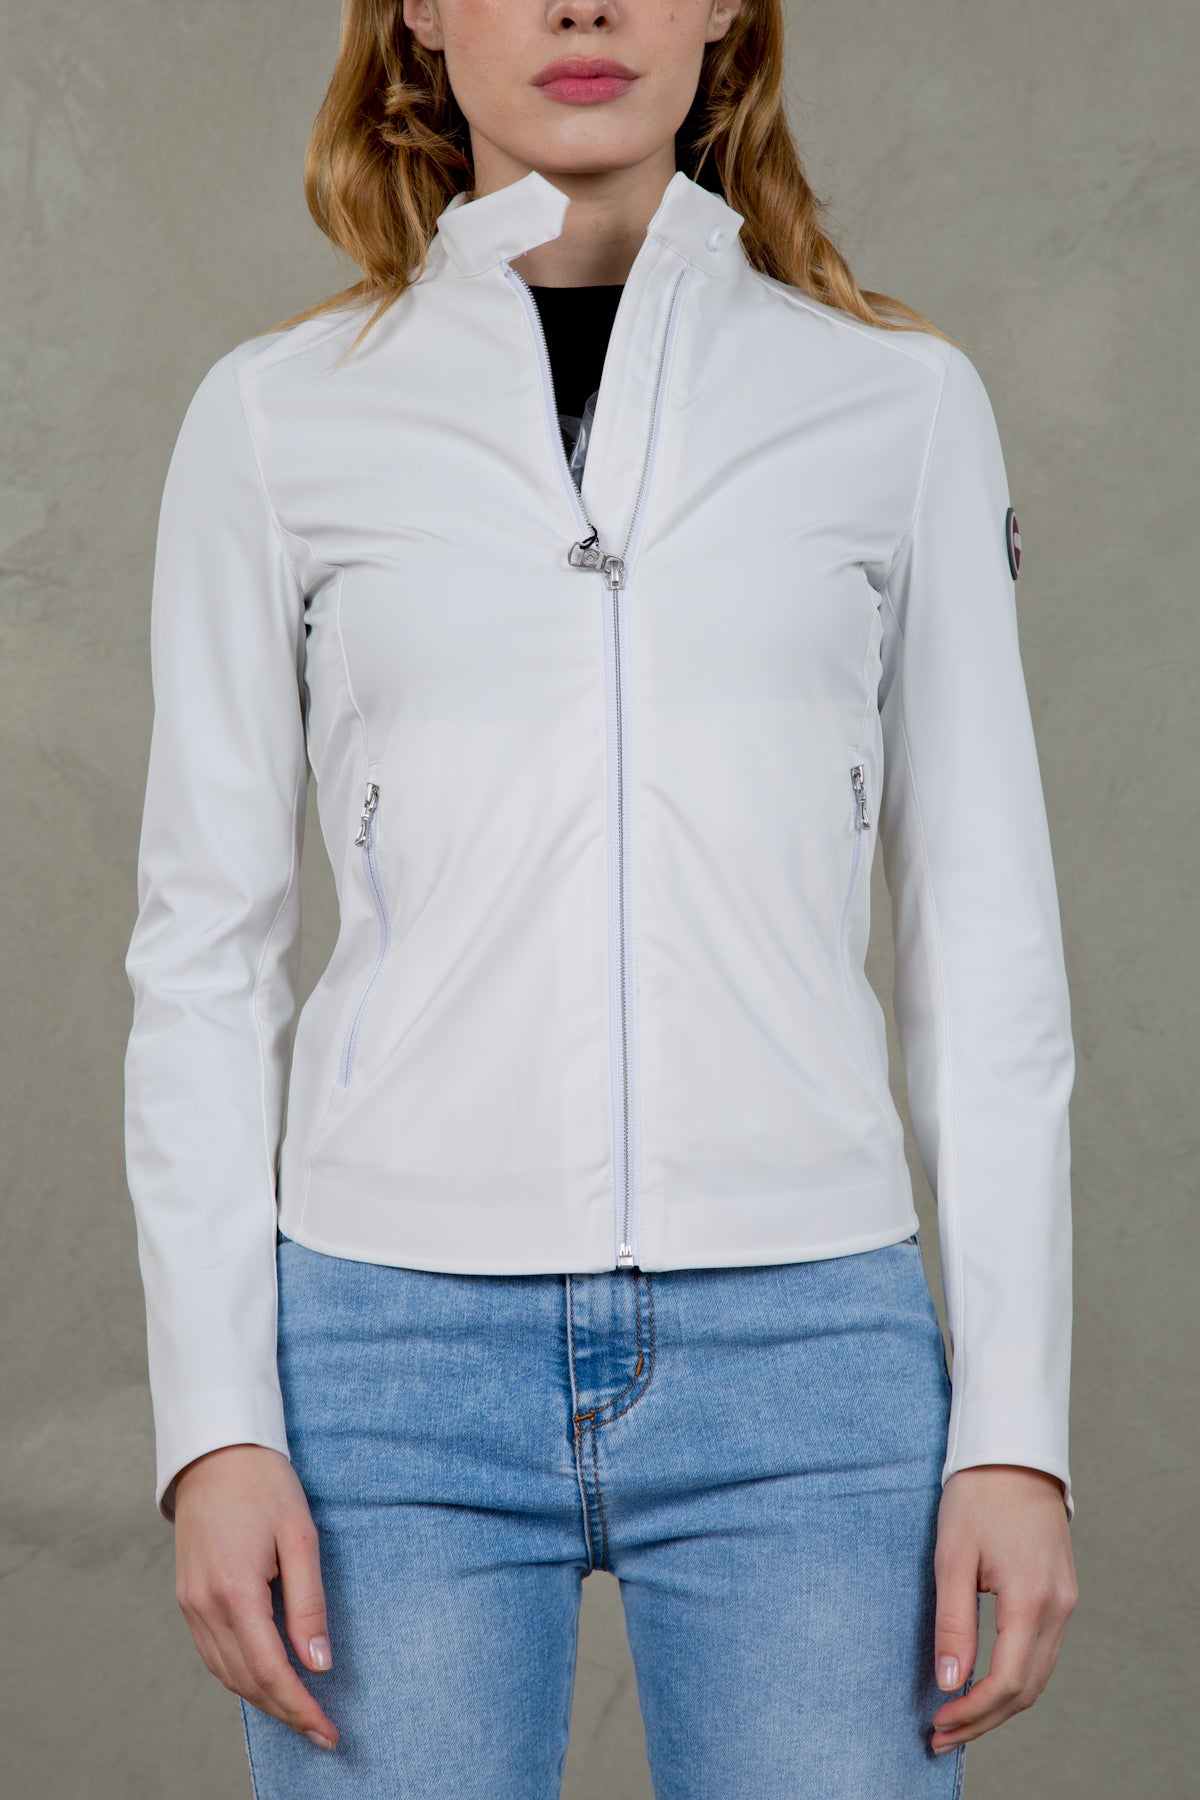 Softshell windproof jacket for women 1902r6wv white bianco woman  - 2